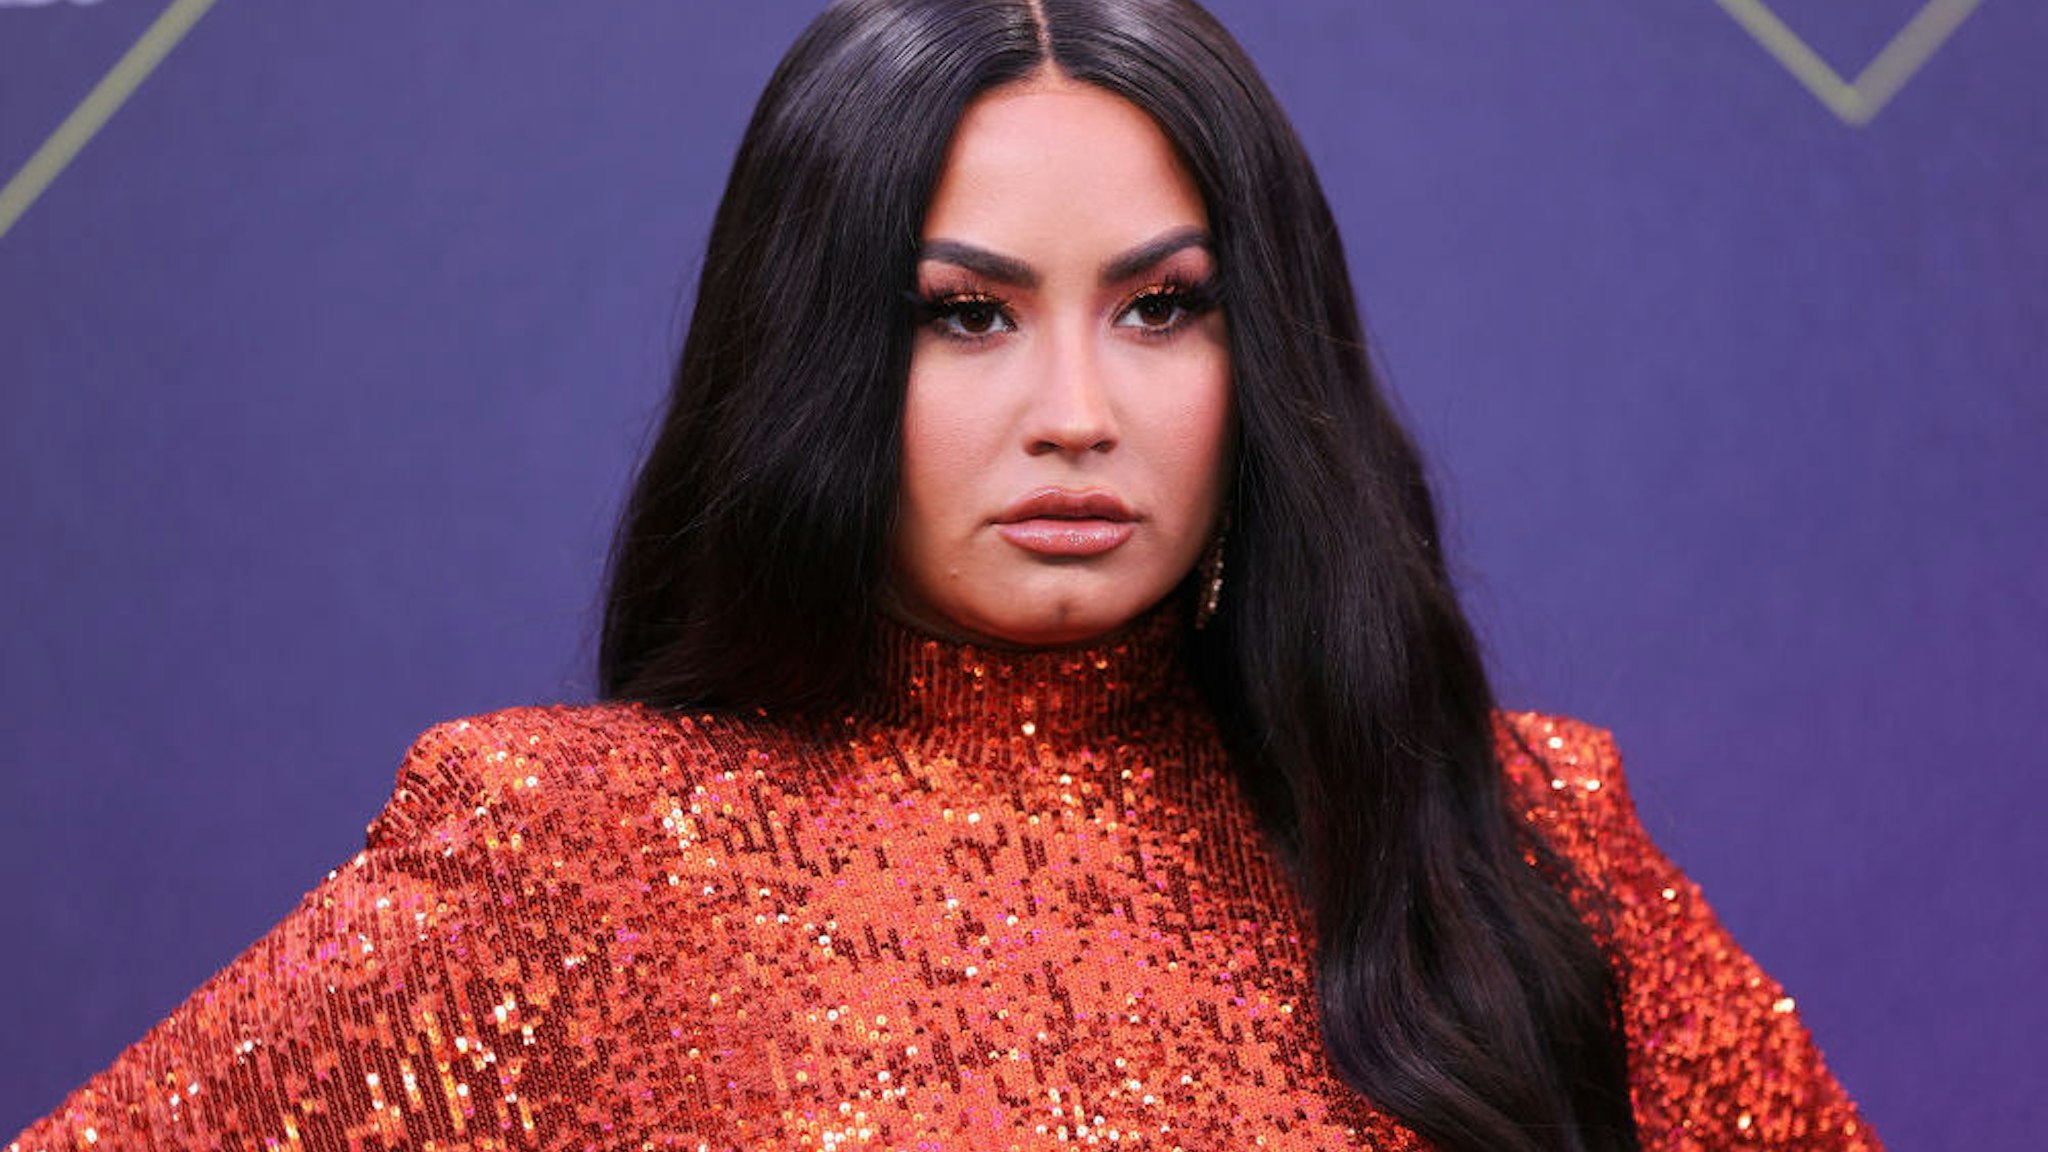 NOVEMBER 15: 2020 E! PEOPLE'S CHOICE AWARDS -- In this image released on November 15, Demi Lovato arrives at the 2020 E! People's Choice Awards held at the Barker Hangar in Santa Monica, California and on broadcast on Sunday, November 15, 2020.